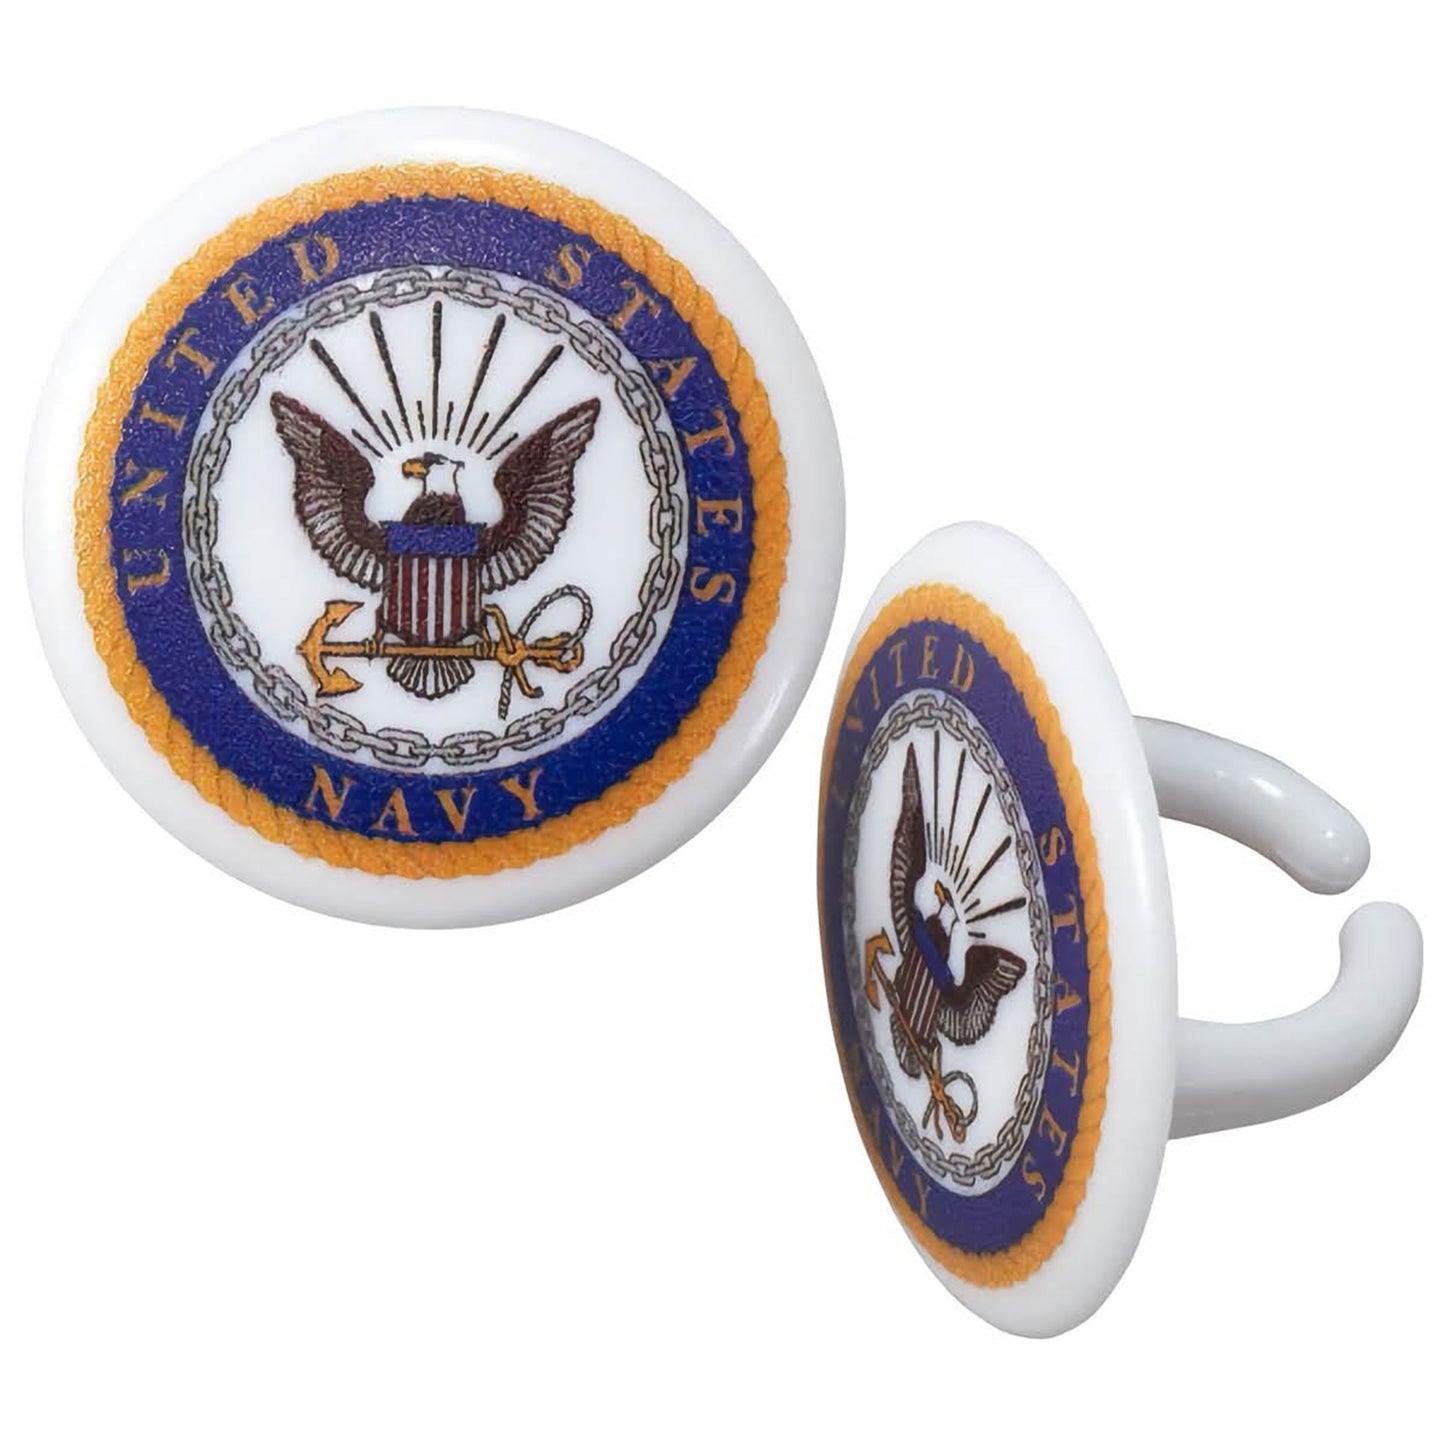 United States Navy cupcake topper rings, displaying the Navy emblem with an eagle and anchor, fitting for Navy enlistment celebrations, graduations, or honoring service members.